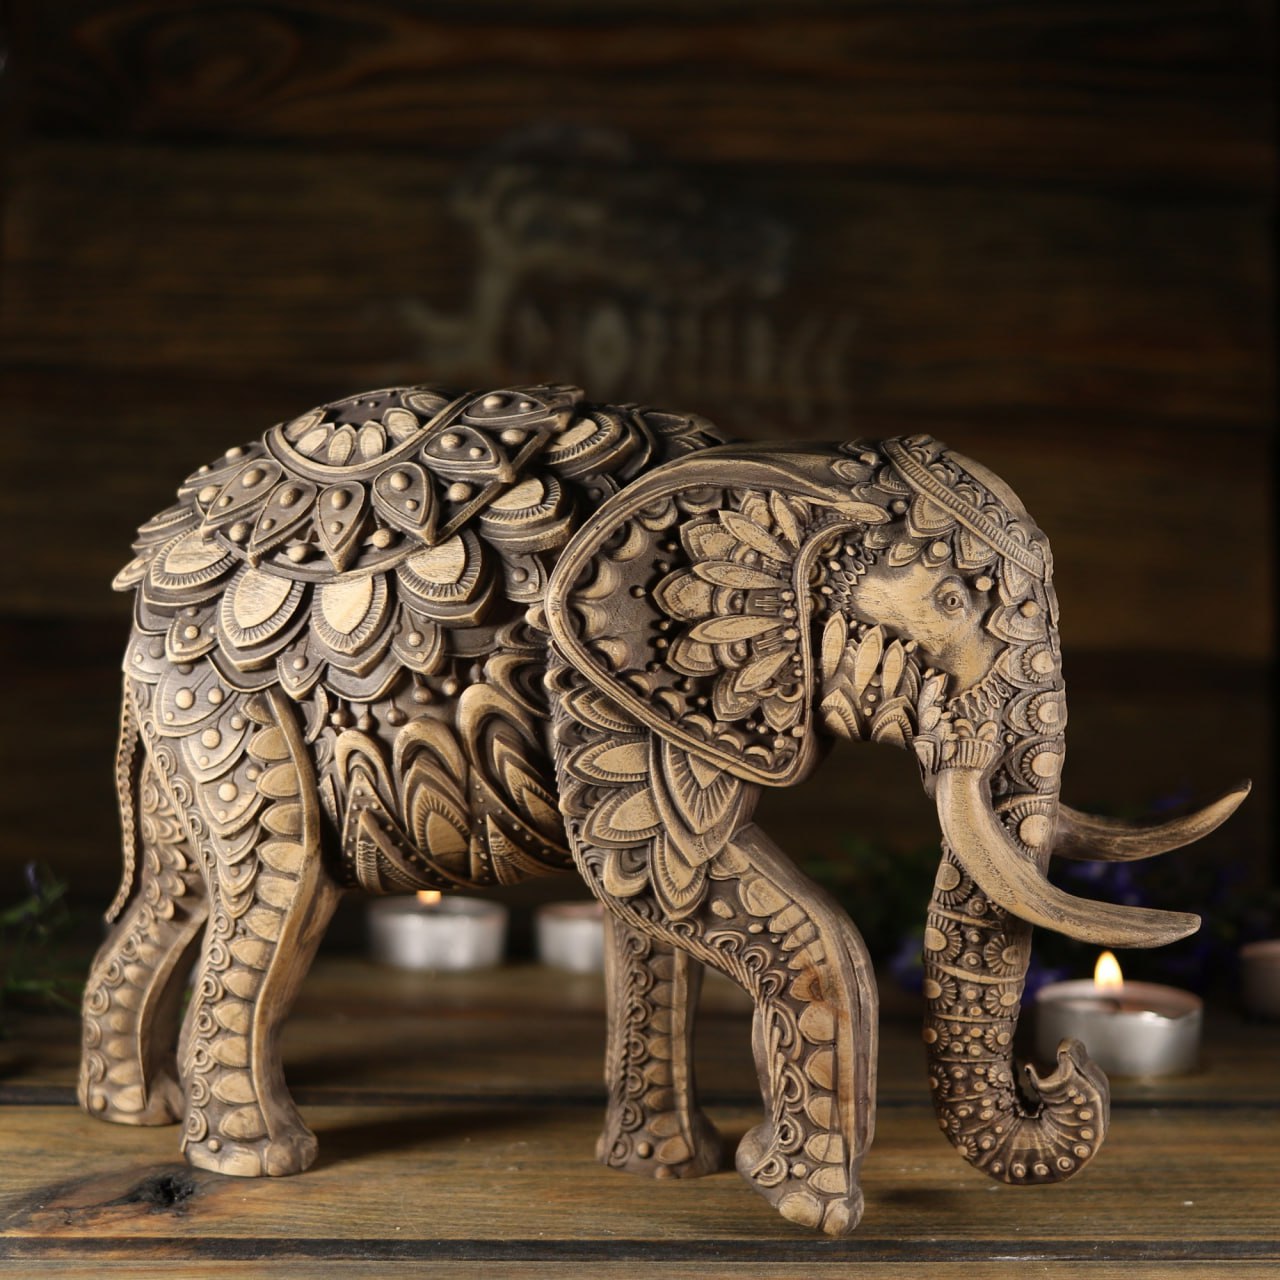 Handcrafted Wooden Elephant Statue: Symbol of Strength & Exotic Elephant Decor